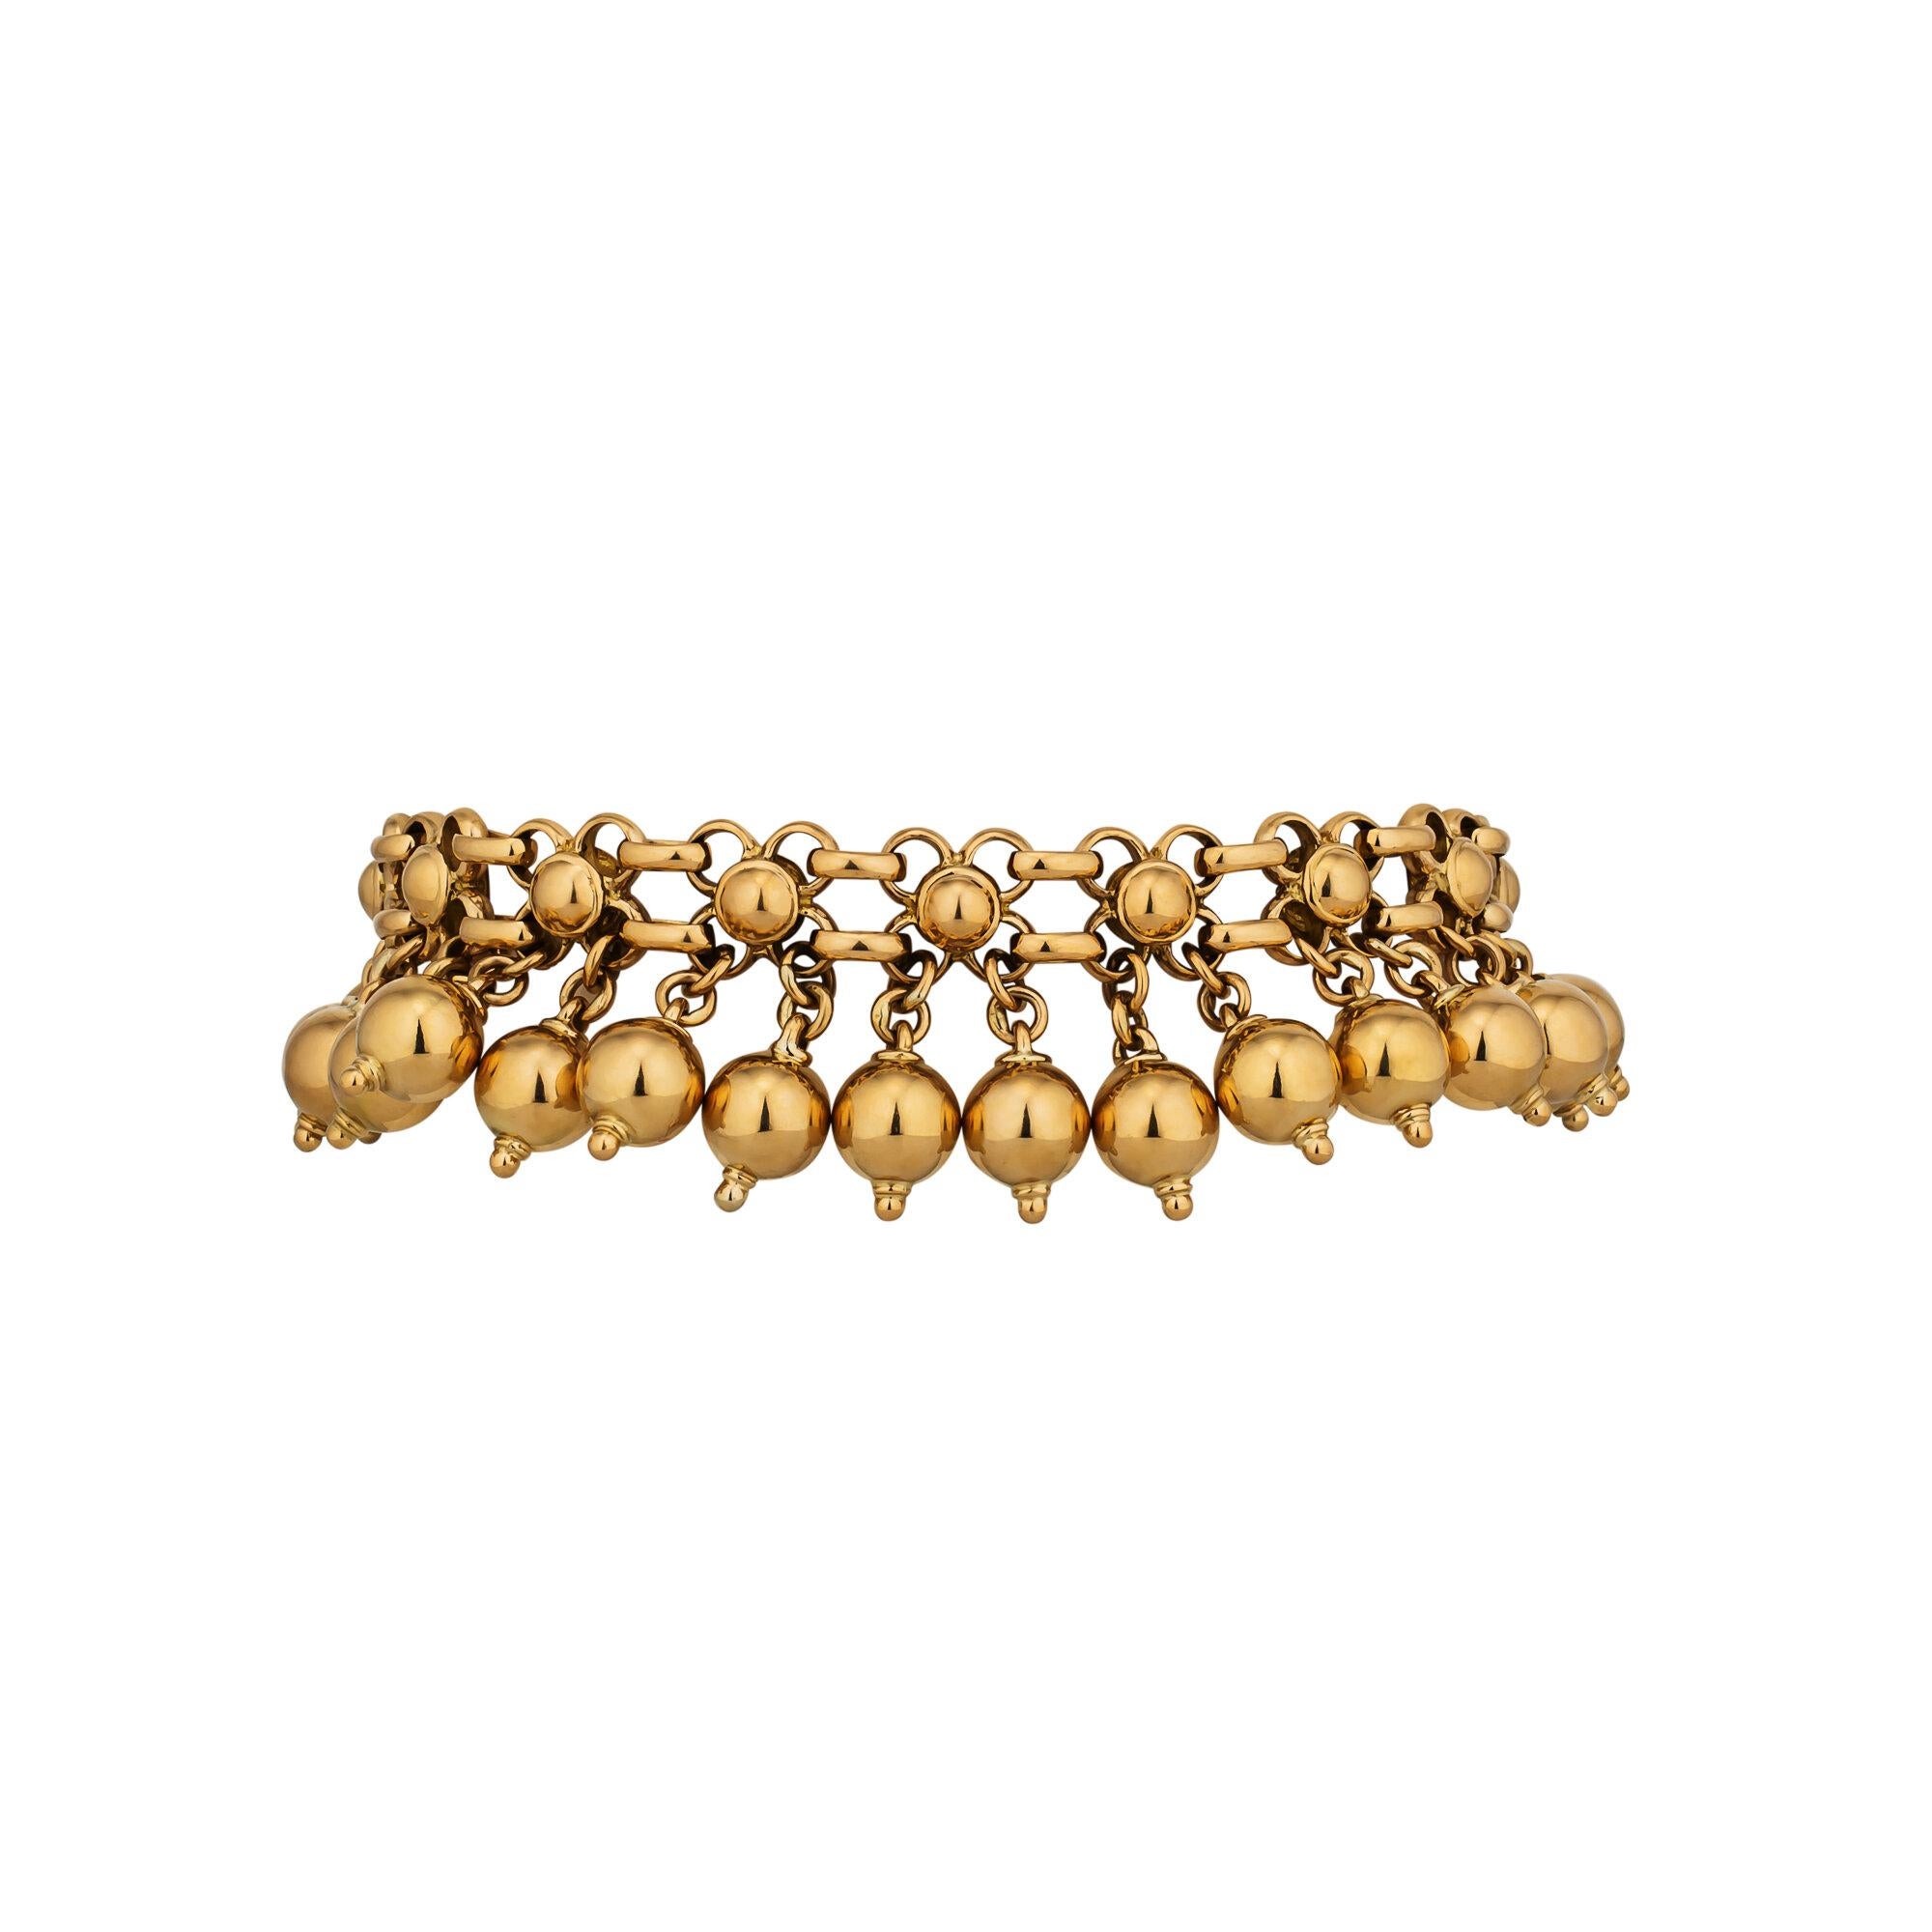 Stir things up with this vintage French Rene Boivin beaded fringe bracelet.  With 32 gold beads gracefully dancing from a mesh link bracelet, this circa 1980 collectible jewel will liven up your wardrobe.  Signed Boivin.  18 karat yellow gold.  7